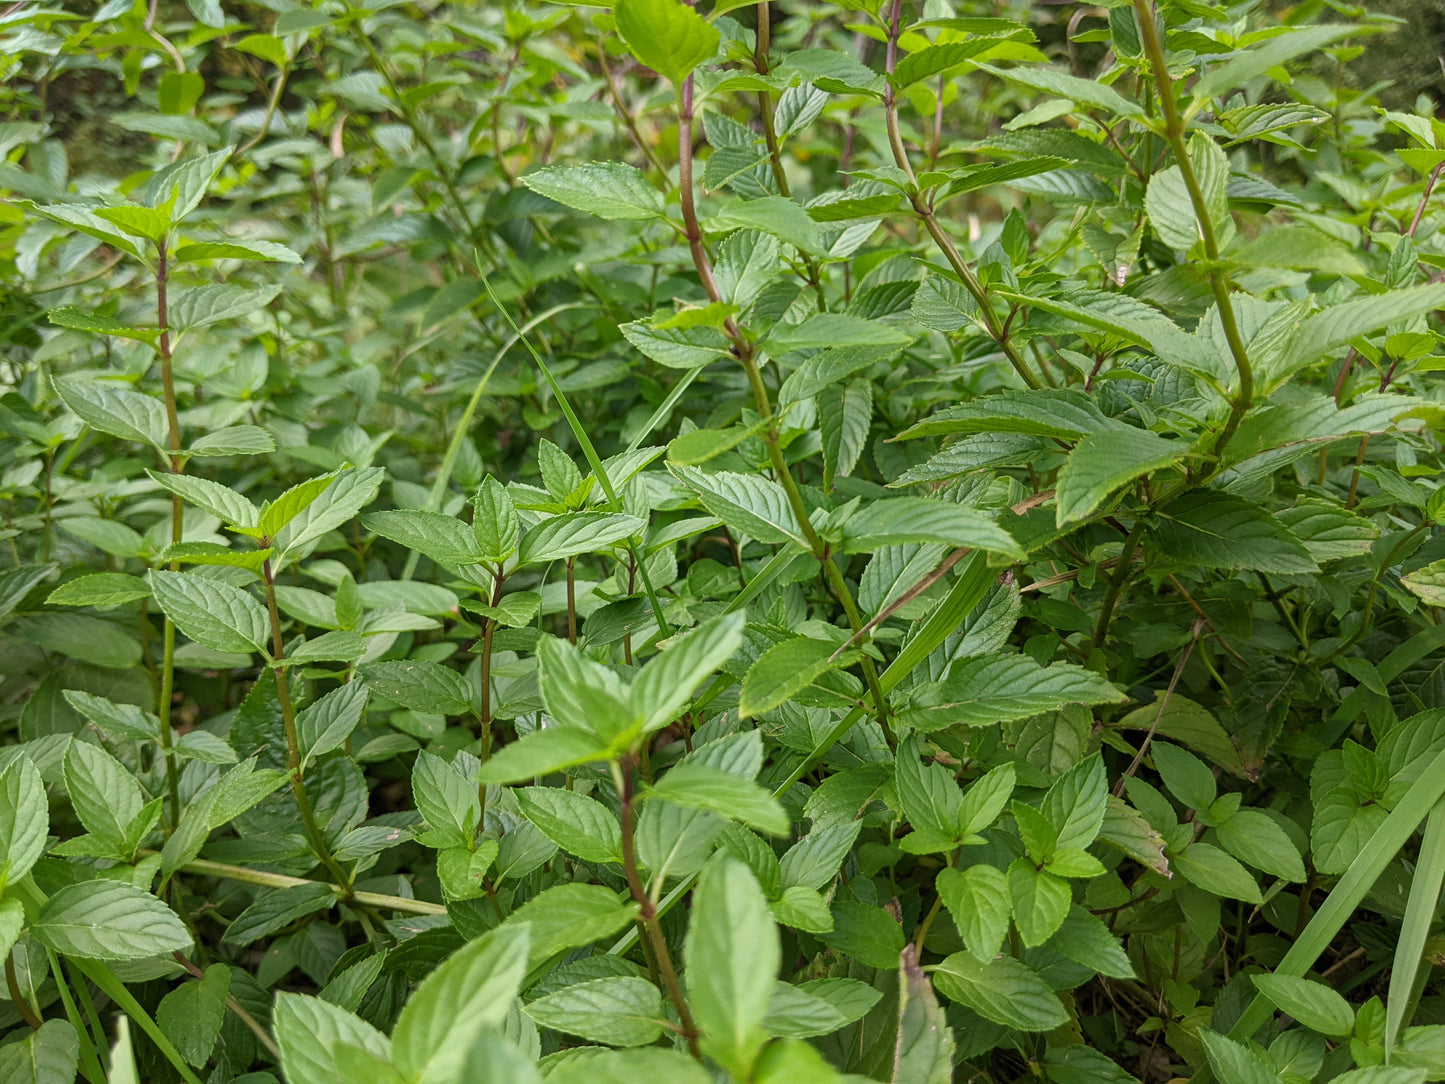 Chocolate mint, Mentha x Piperita, has a bright minty flavor with chocolate notes. It makes a delicious tea that's good for your digestive system